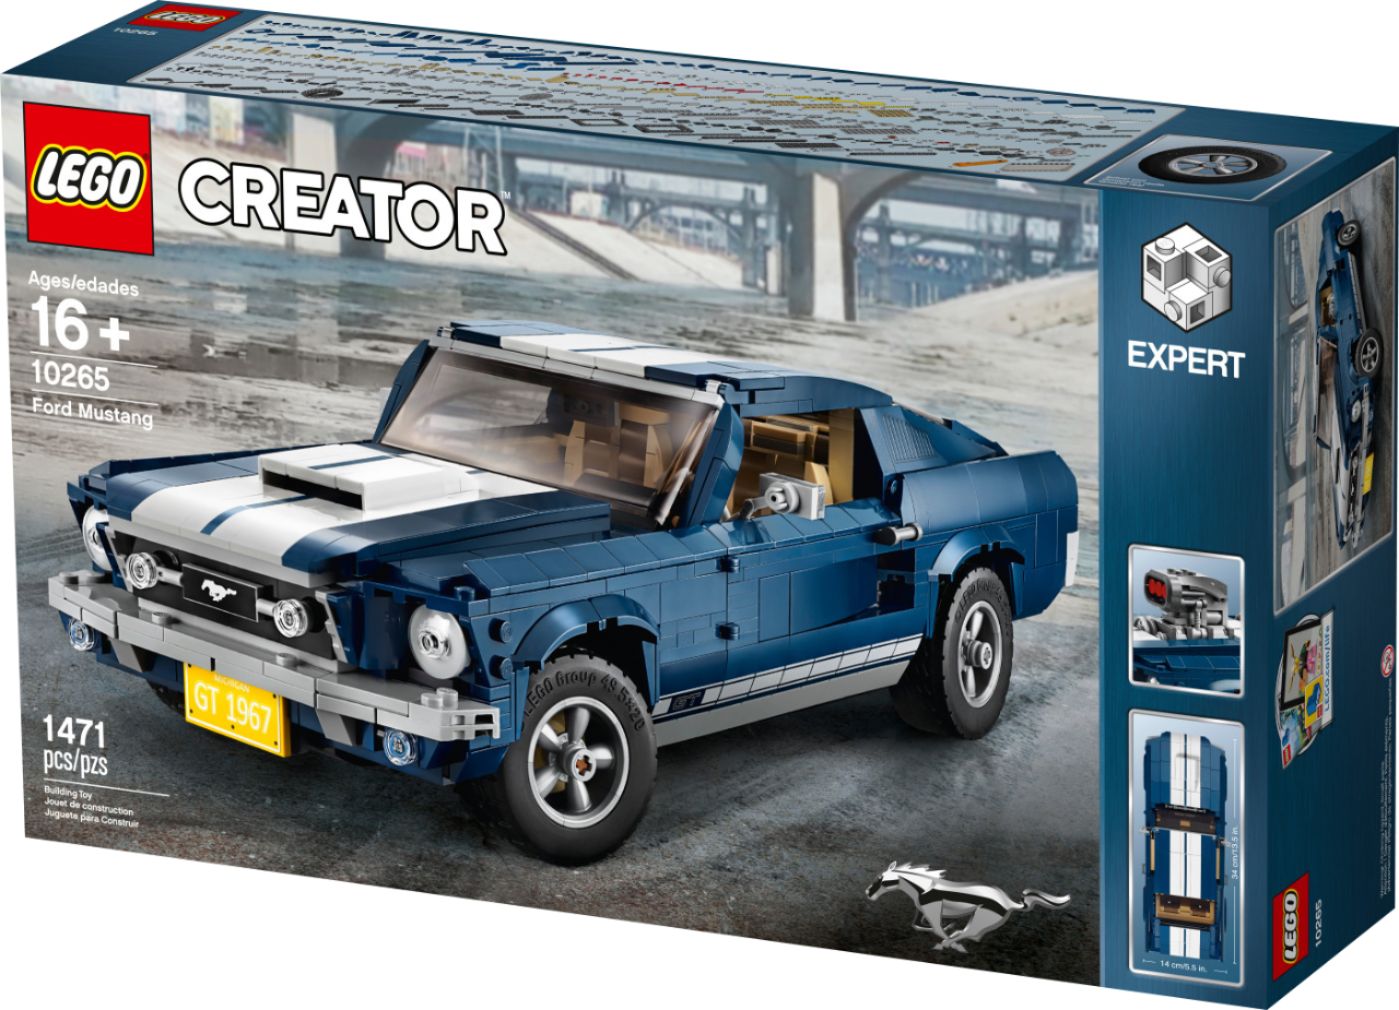 LEGO Creator Expert Ford Mustang 10265 6250886 - Best Buy